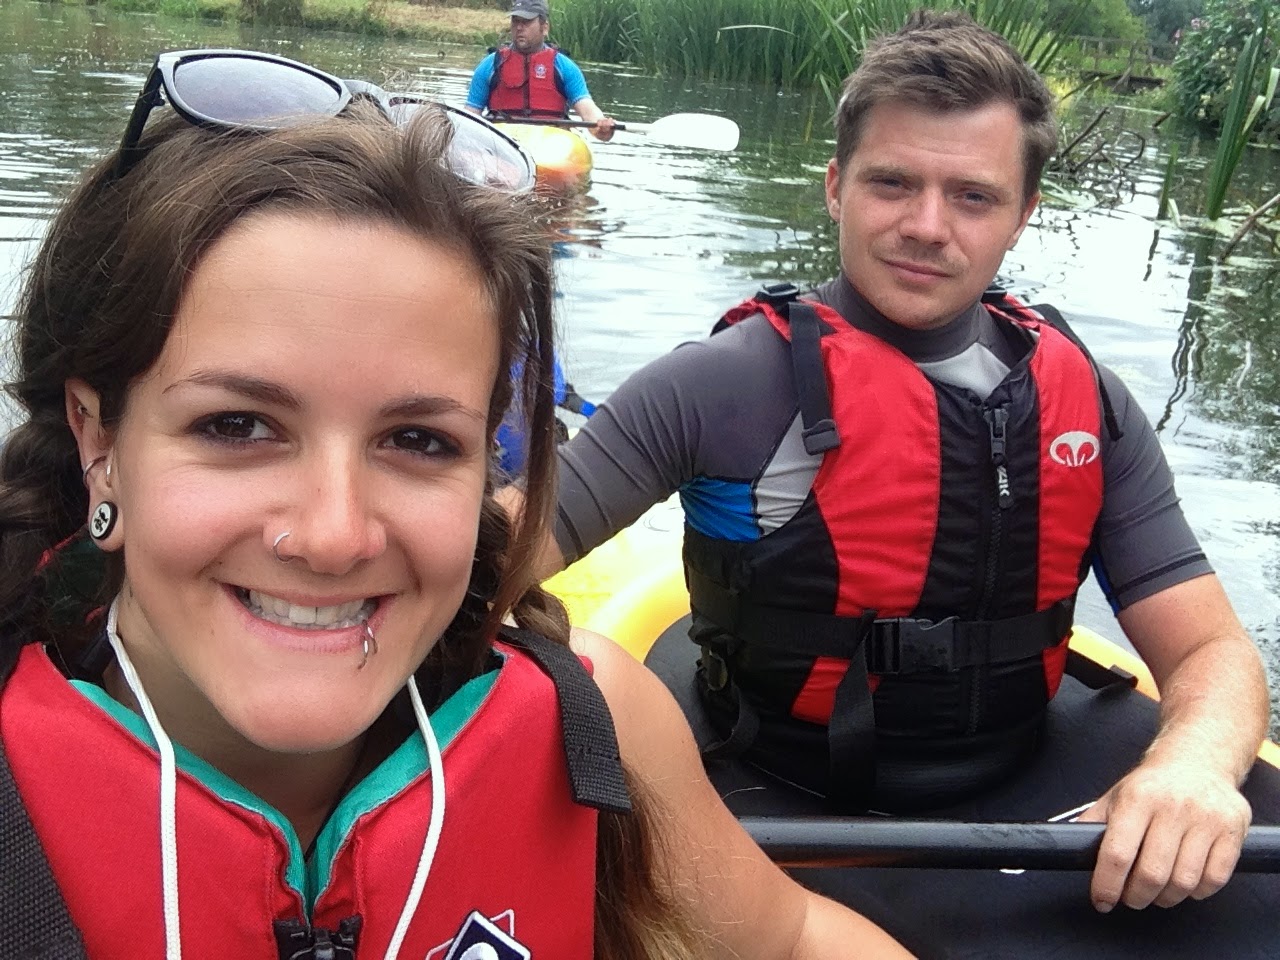 Kayaking down the River Ouse with Martlet Kayak Club Brighton